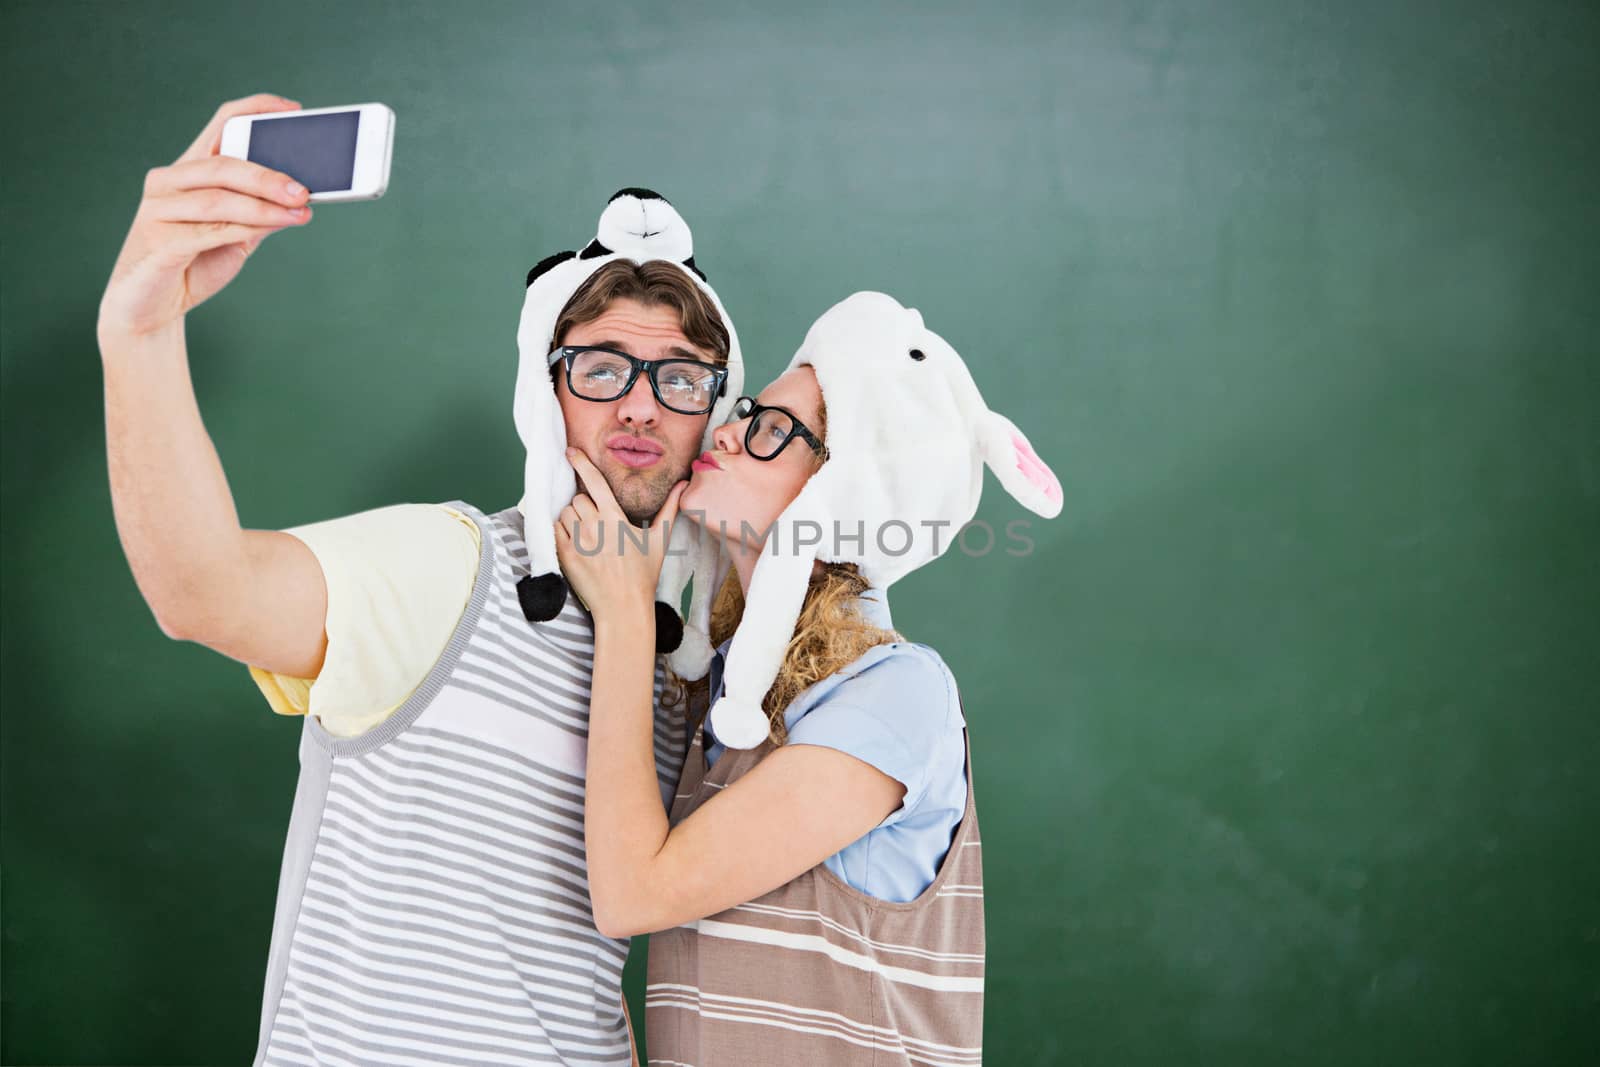 Geeky hipster couple taking selfie with smartphone against green chalkboard